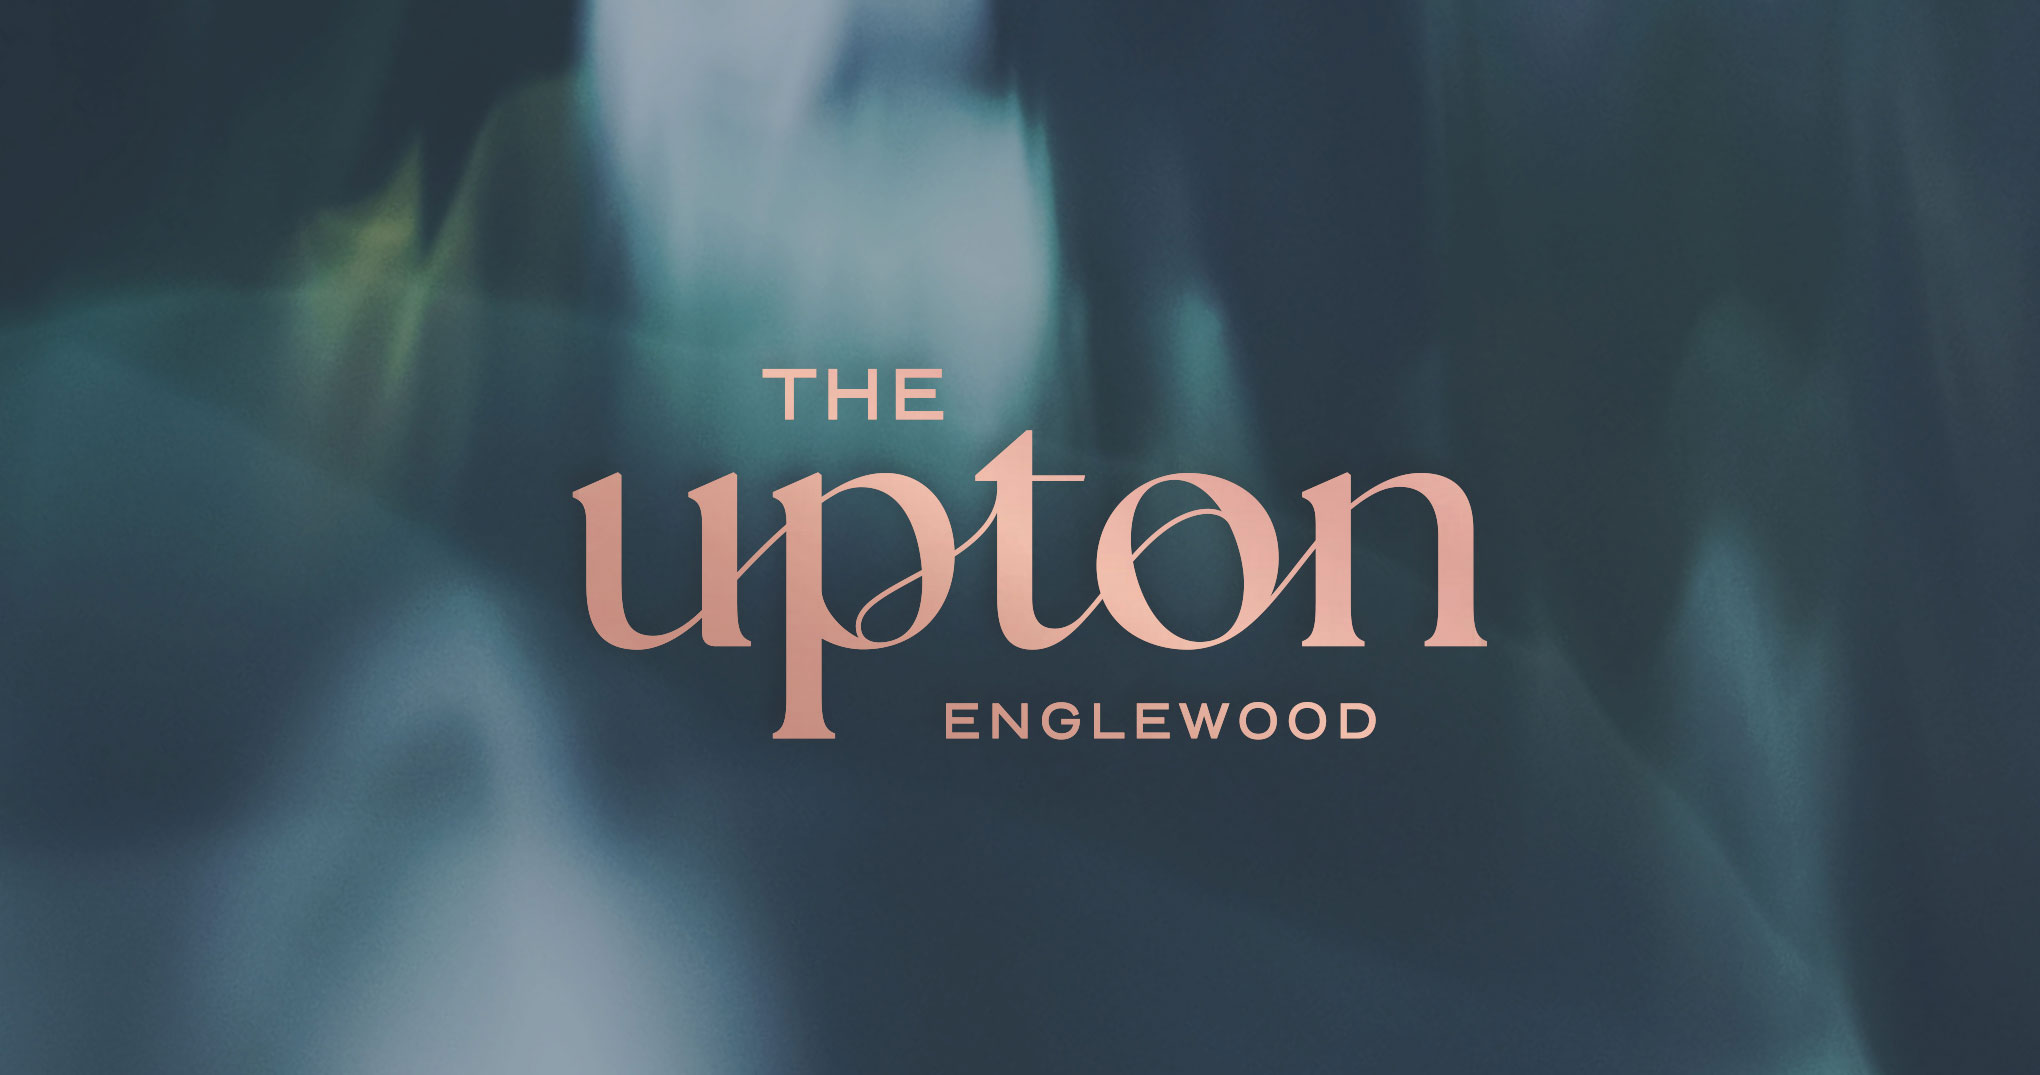 The Uptown Englewood